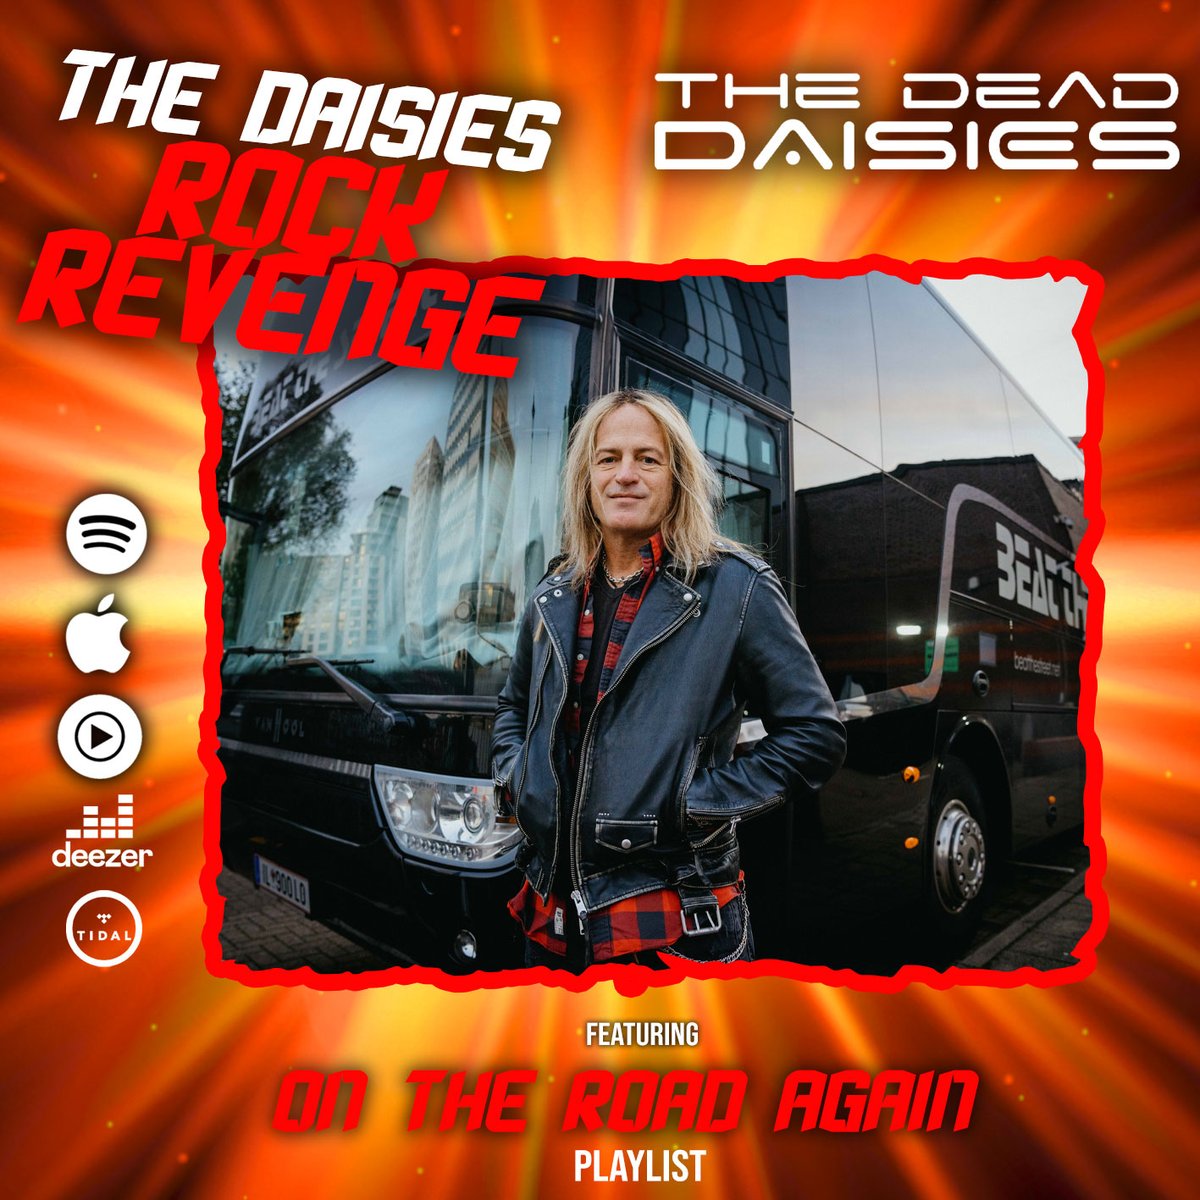 We're ON THE ROAD AGAIN in the UK next week so, a rockin' playlist is needed!⚡⚡
Crank this up nice & loud!🚀🚀
thedeaddaisies.com/daisies-rock-r…

#TheDeadDaisies #TheDaisiesRockRevenge #OnTheRoadAgain #Playlist